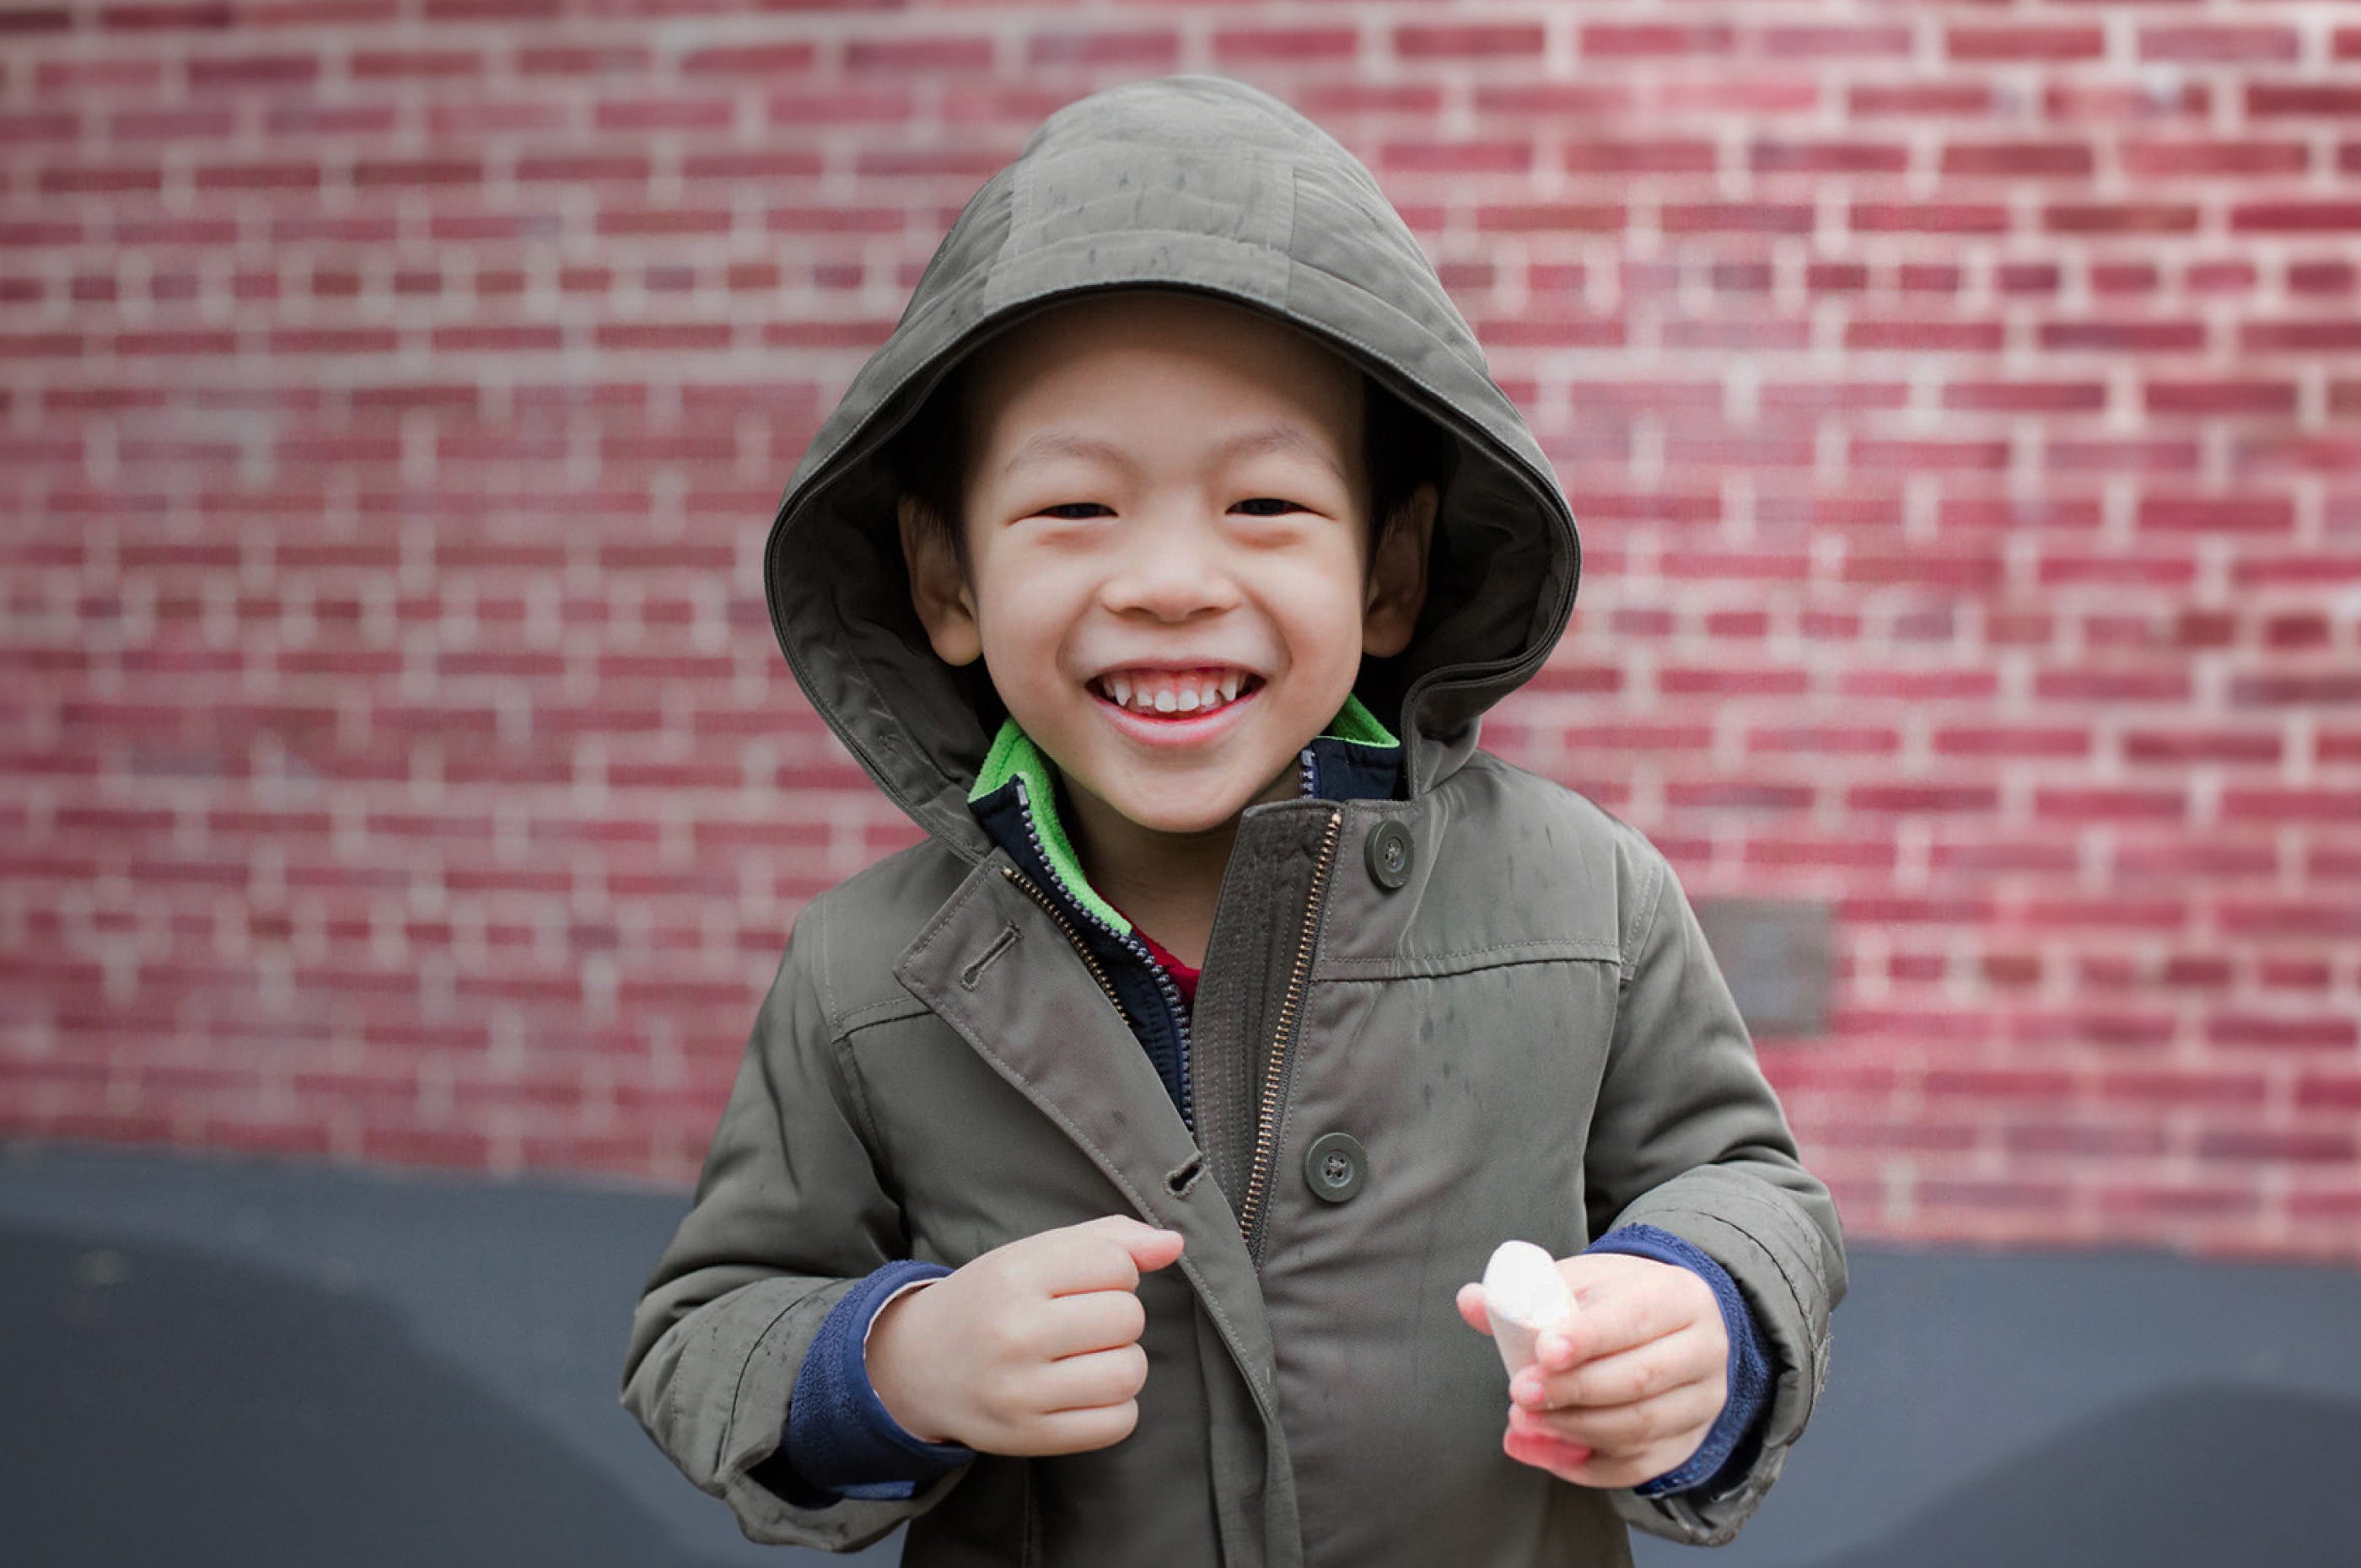 Portrait of a child with his hood up smiling in front of a brick wall holding sidewalk chalk